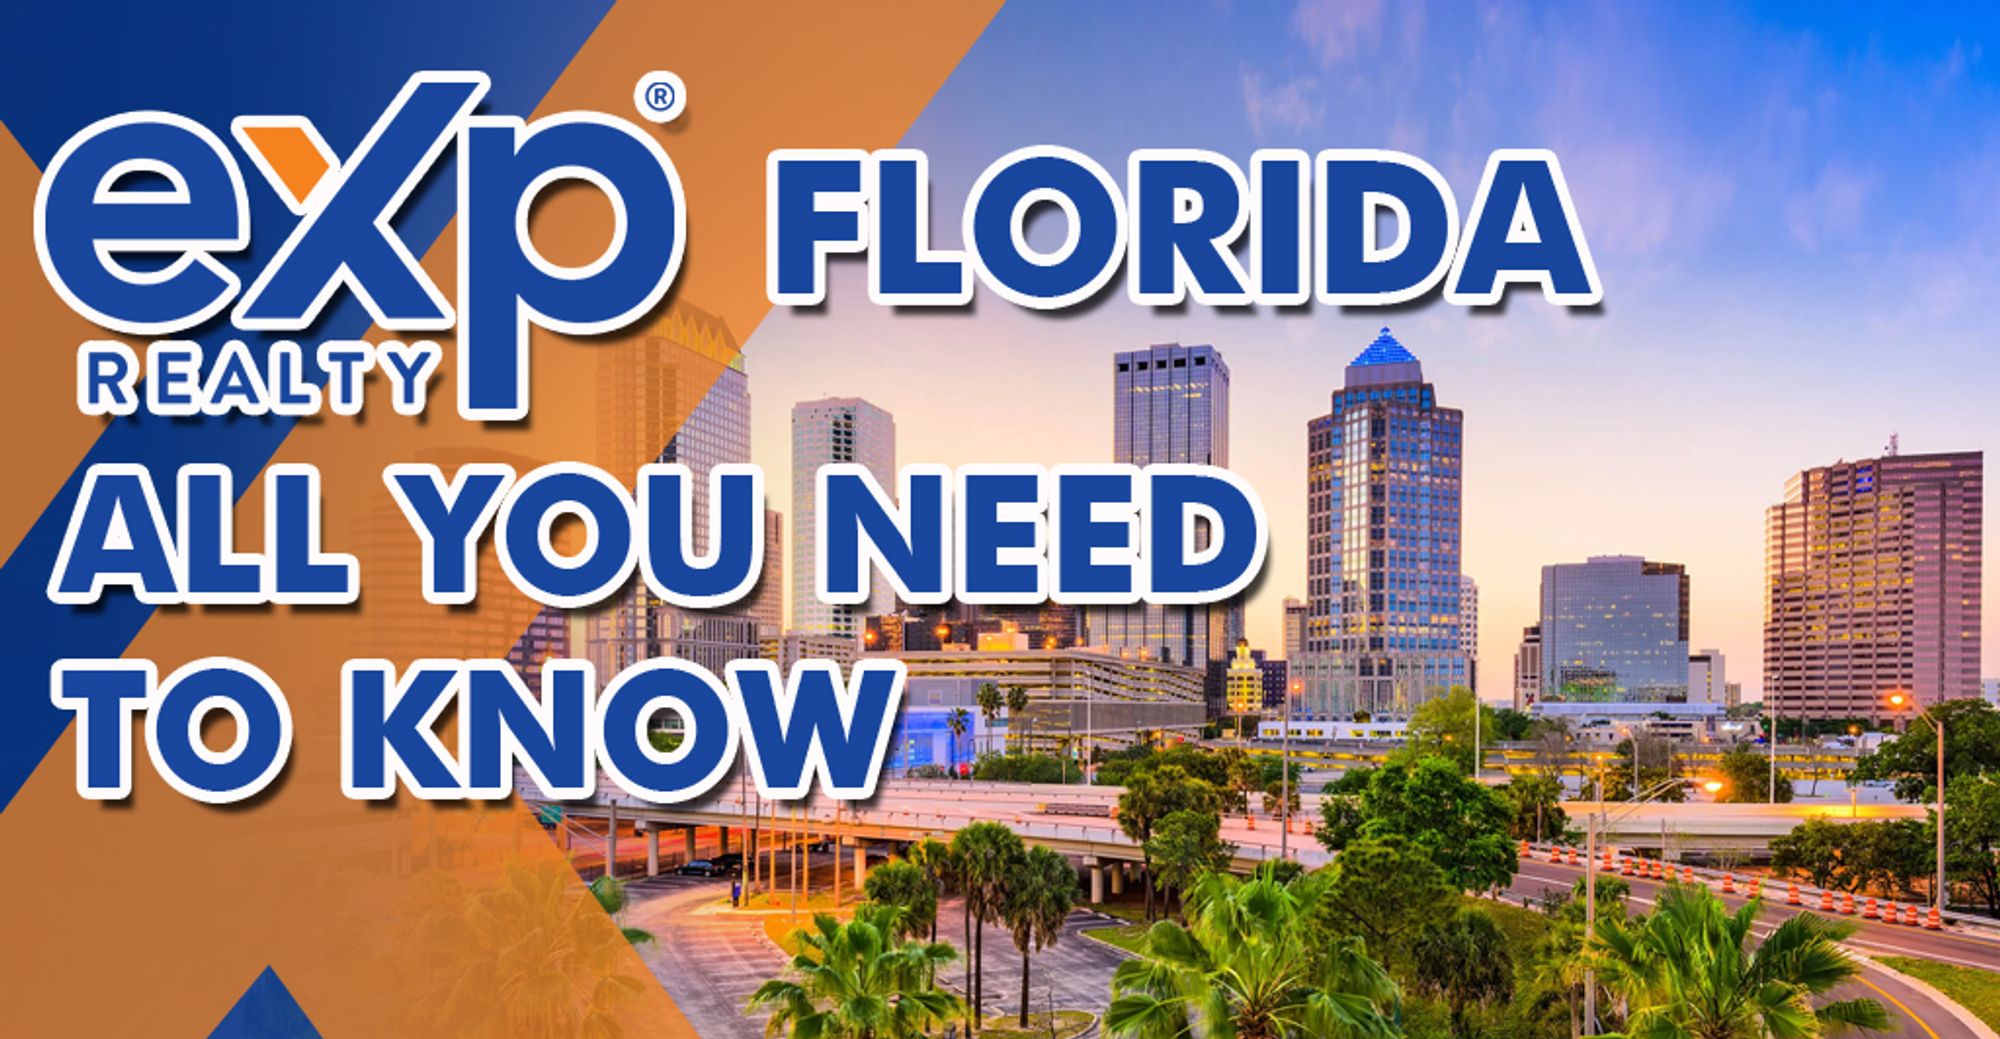 eXp Realty Florida: All You Need to Know - Jaime Resendiz